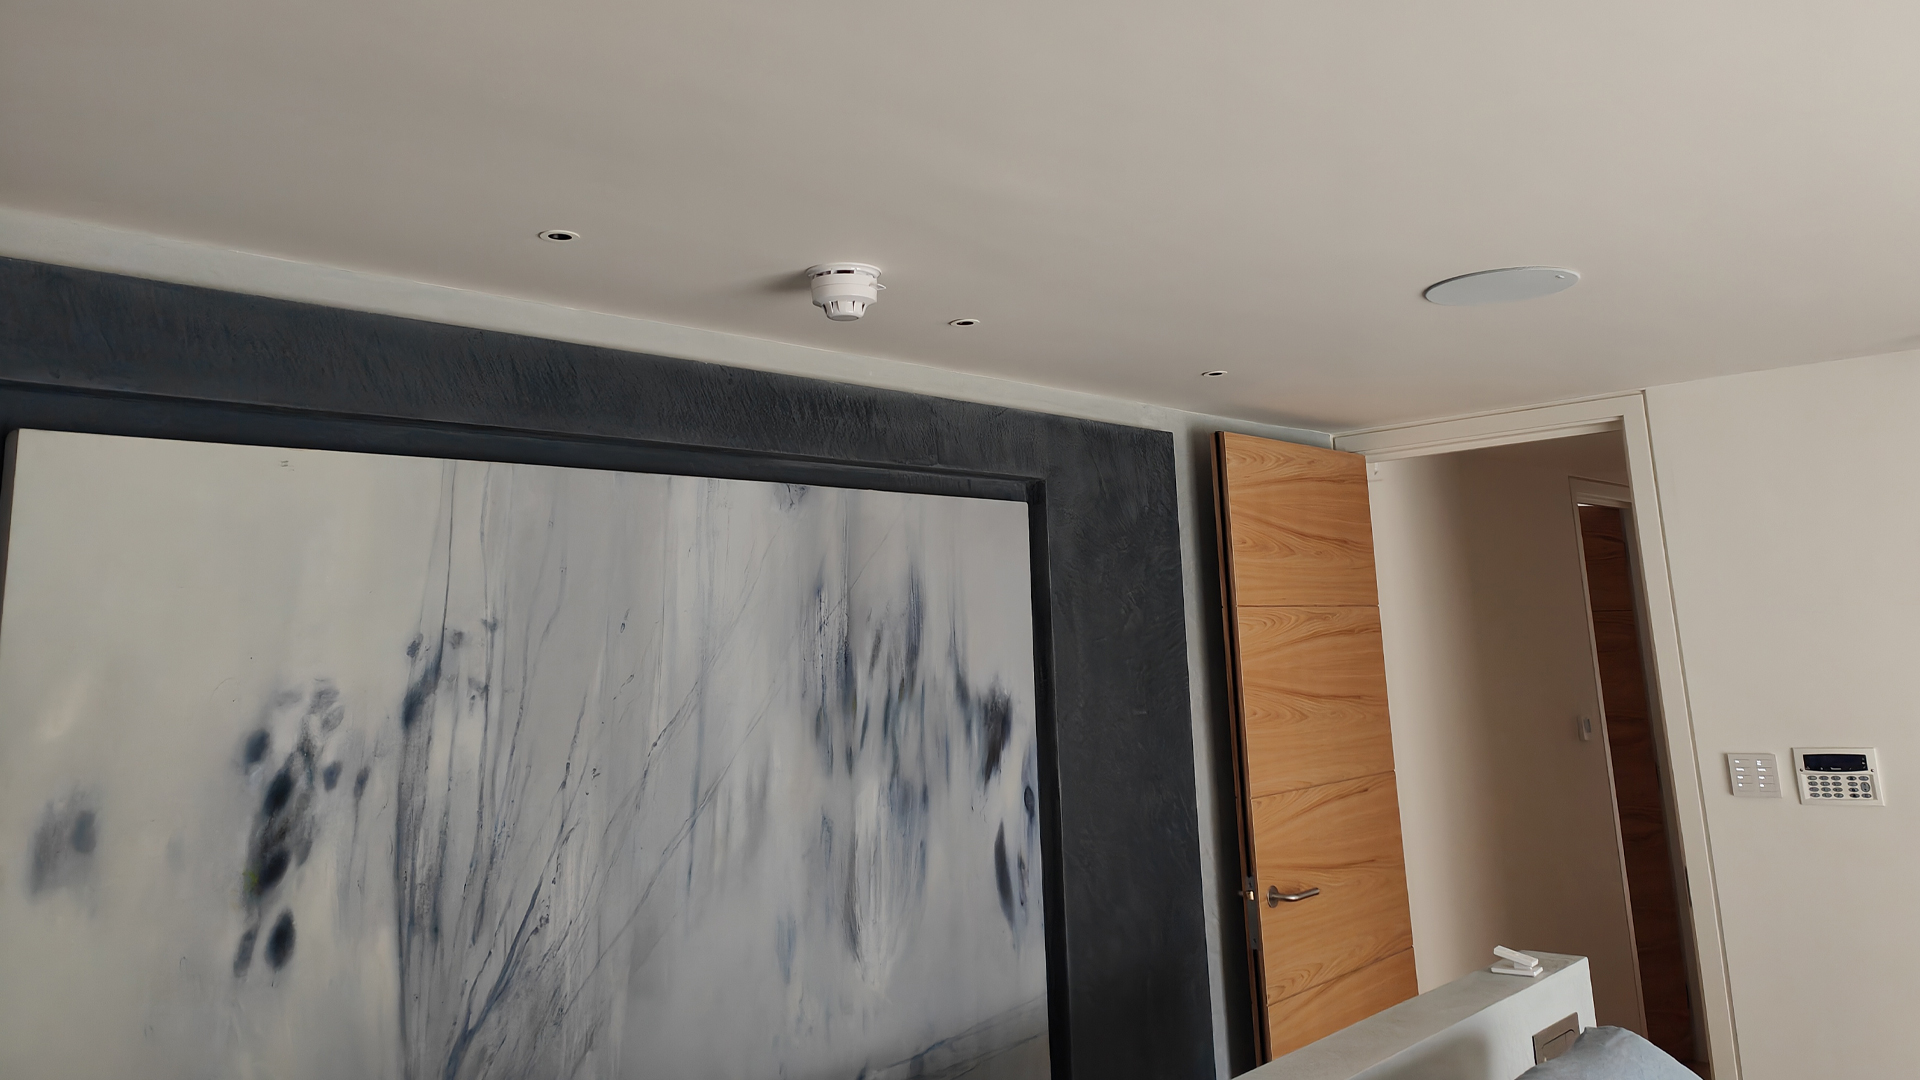 Speakers installed into the Bedroom ceiling